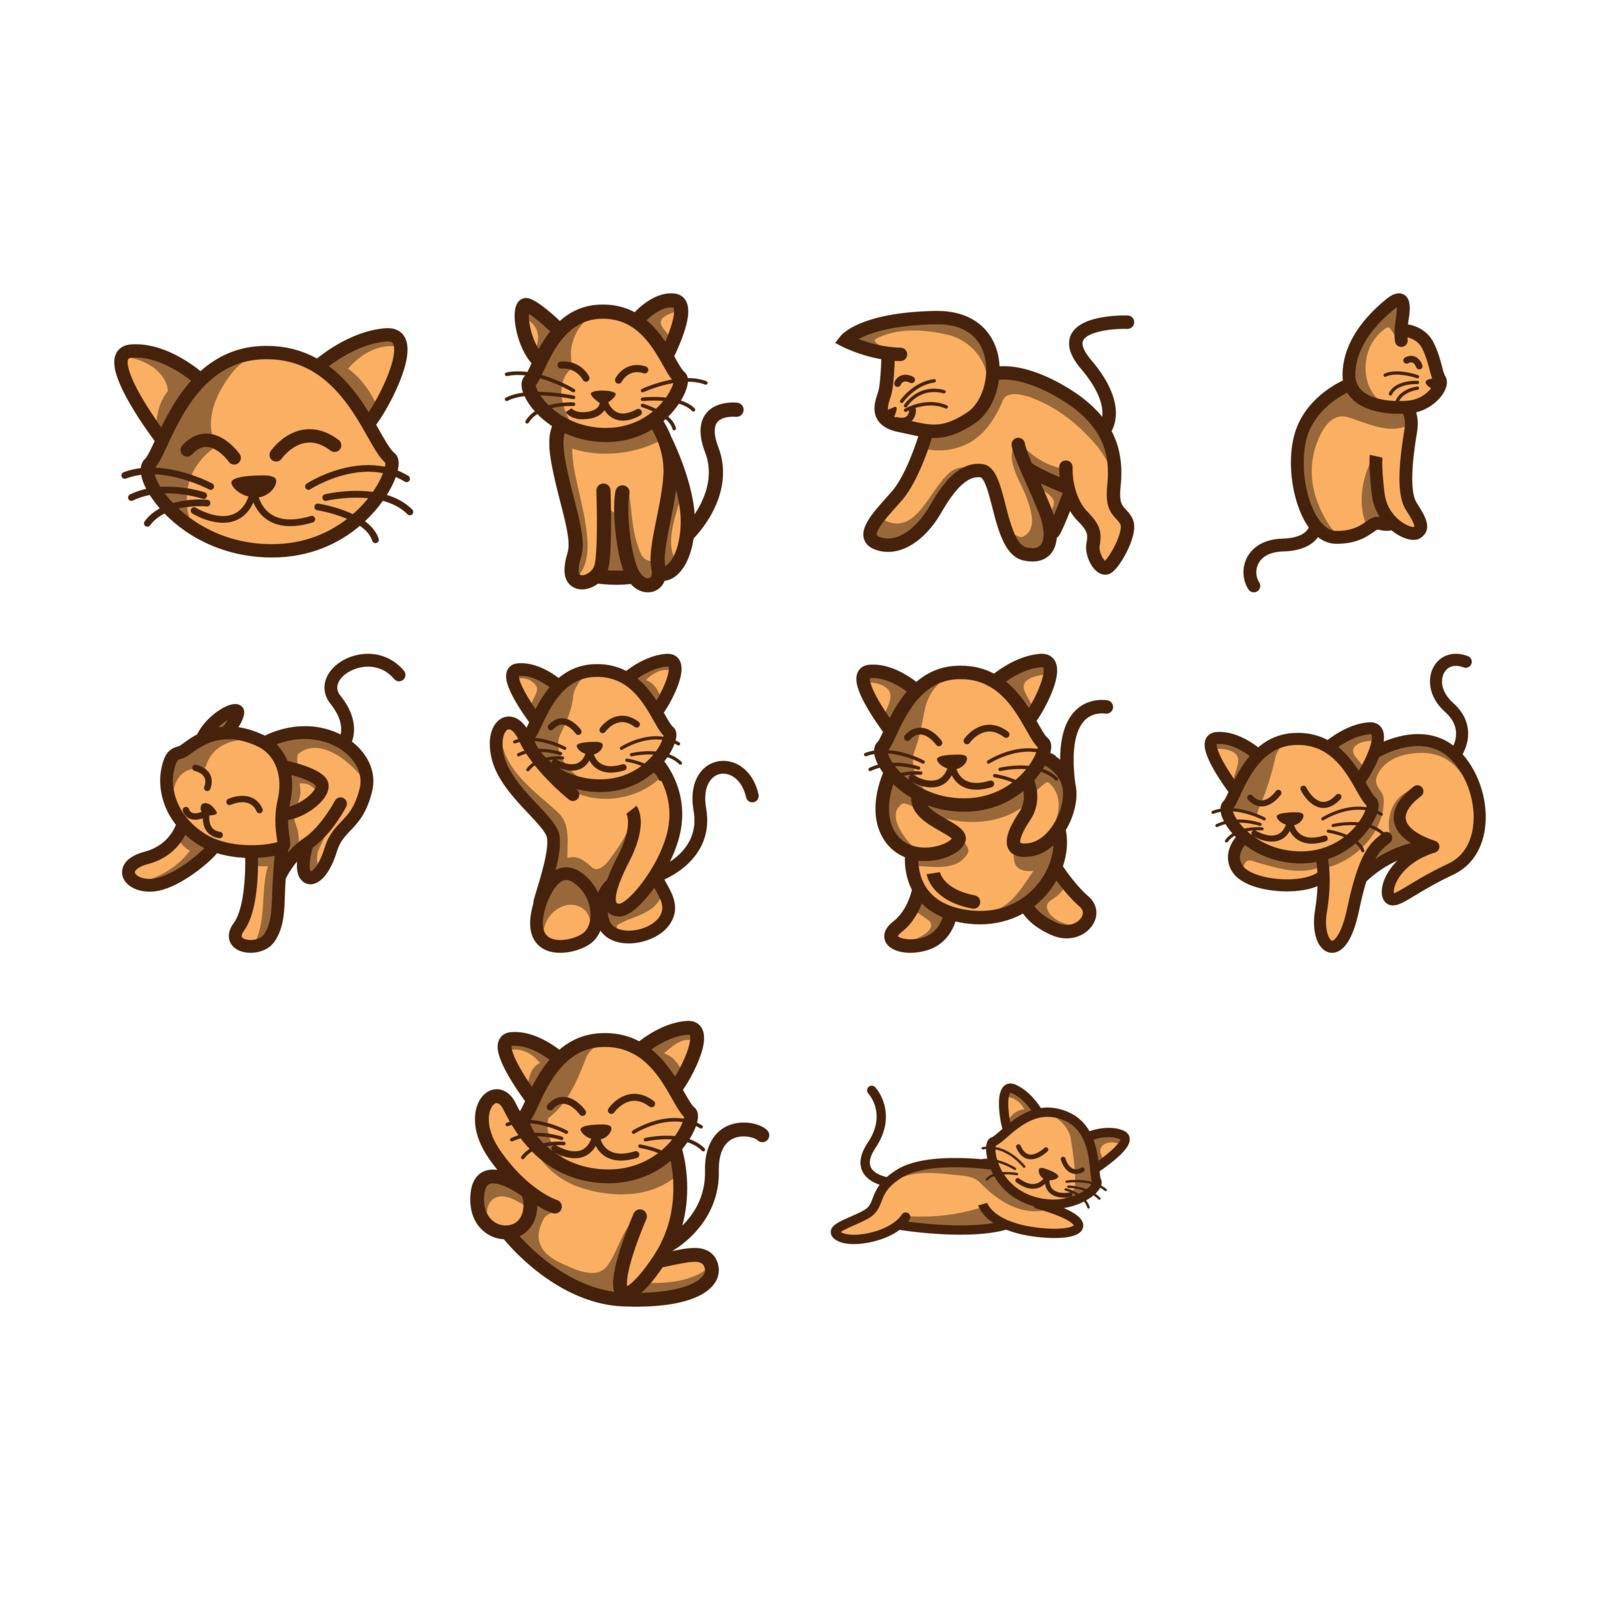 A collection of cartoon cat icon with different pose